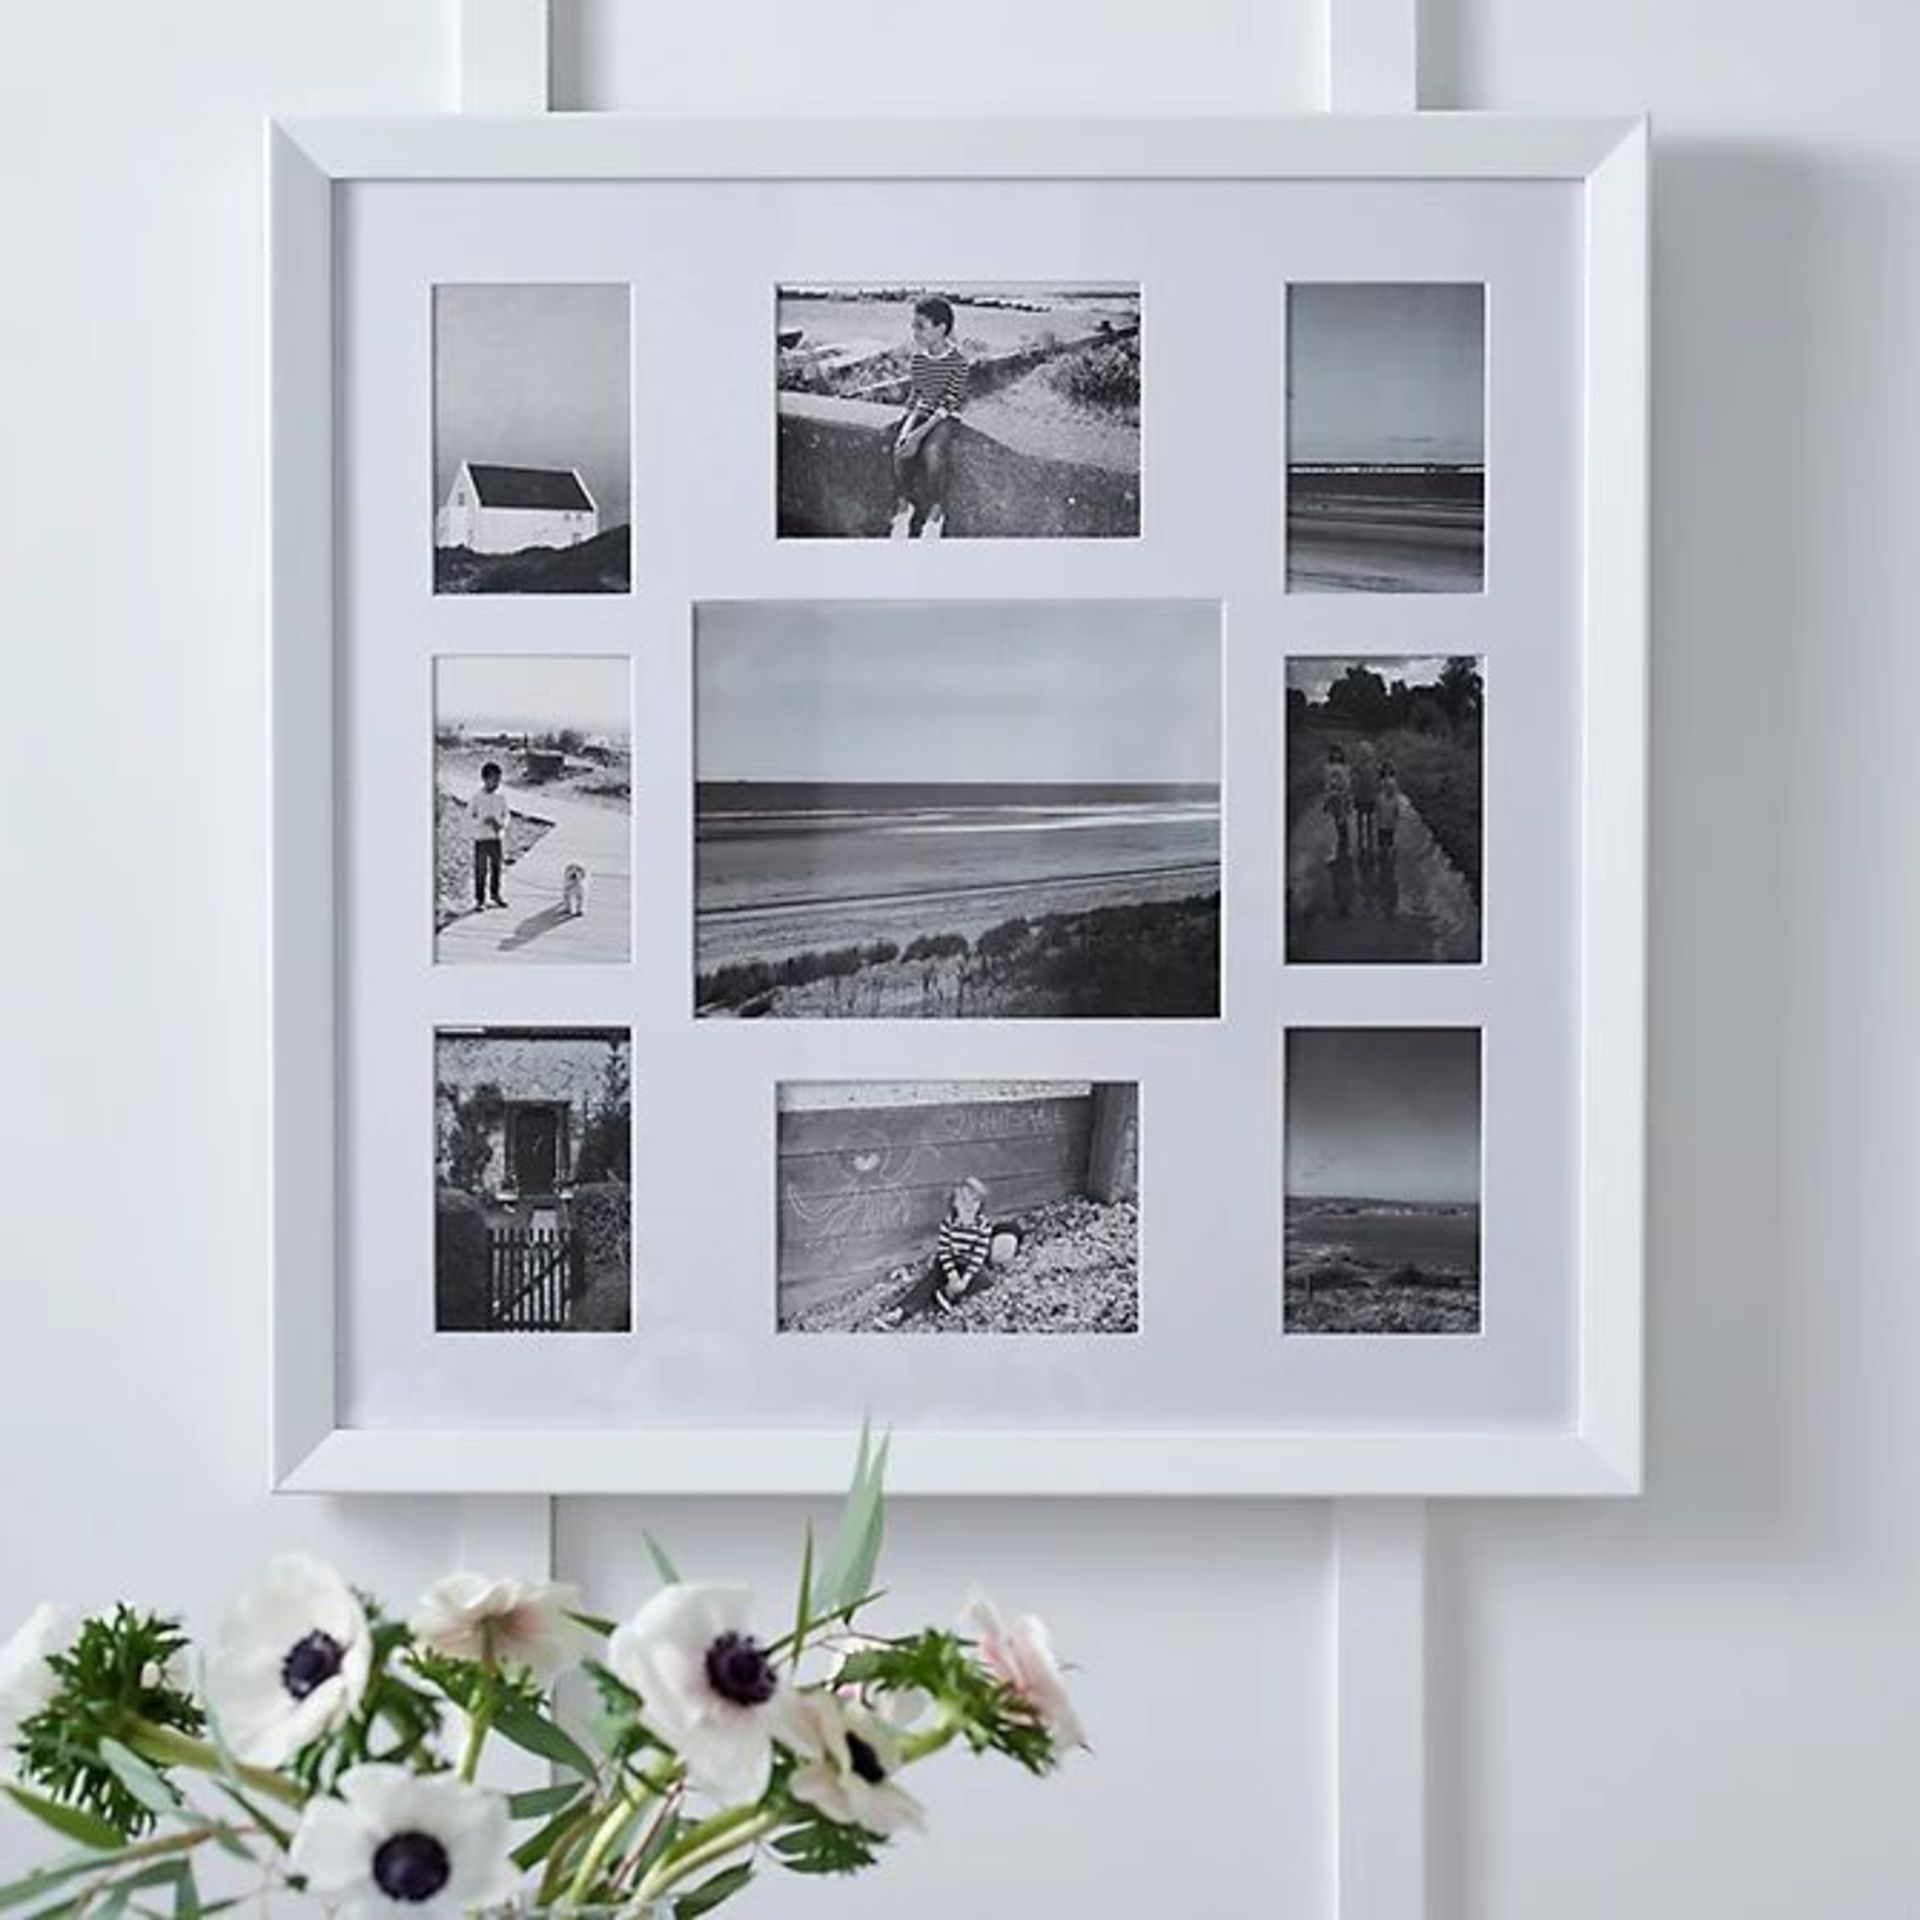 White Company 9 Aperture Wood Photo Frame. - R14.12. Our stylish and versatile wooden frame lets you - Image 2 of 2